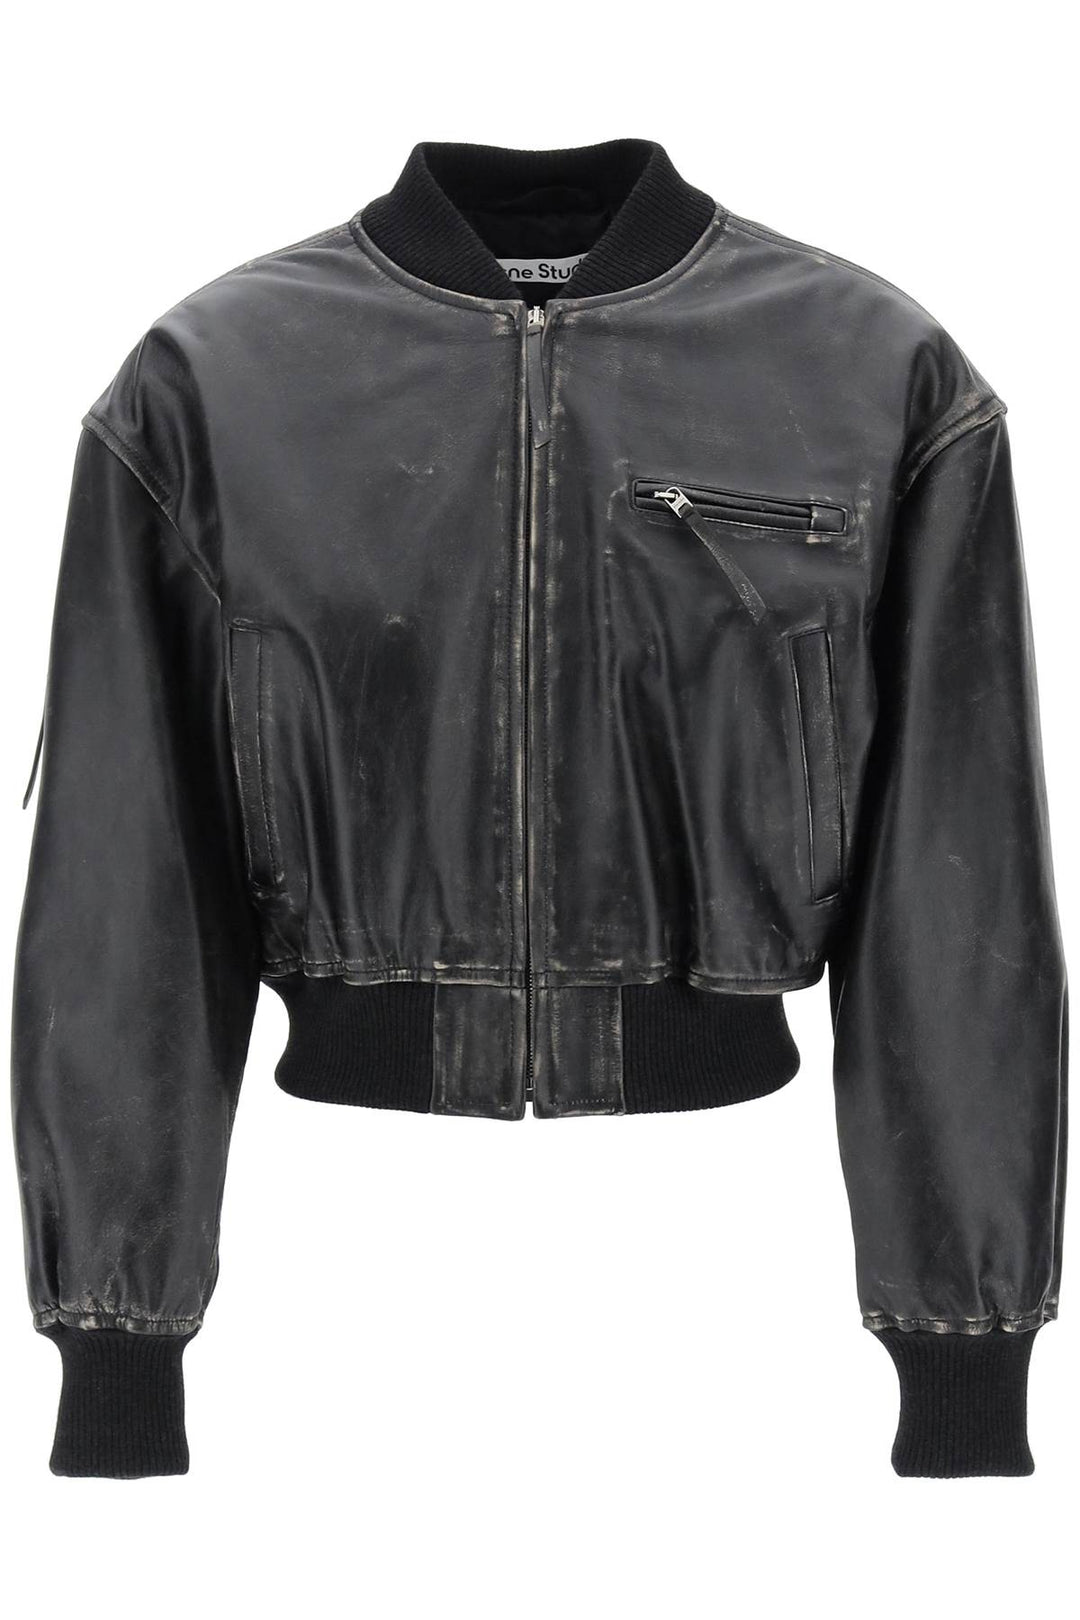 Acne Studios Aged Leather Bomber Jacket With Distressed Treatment   Nero